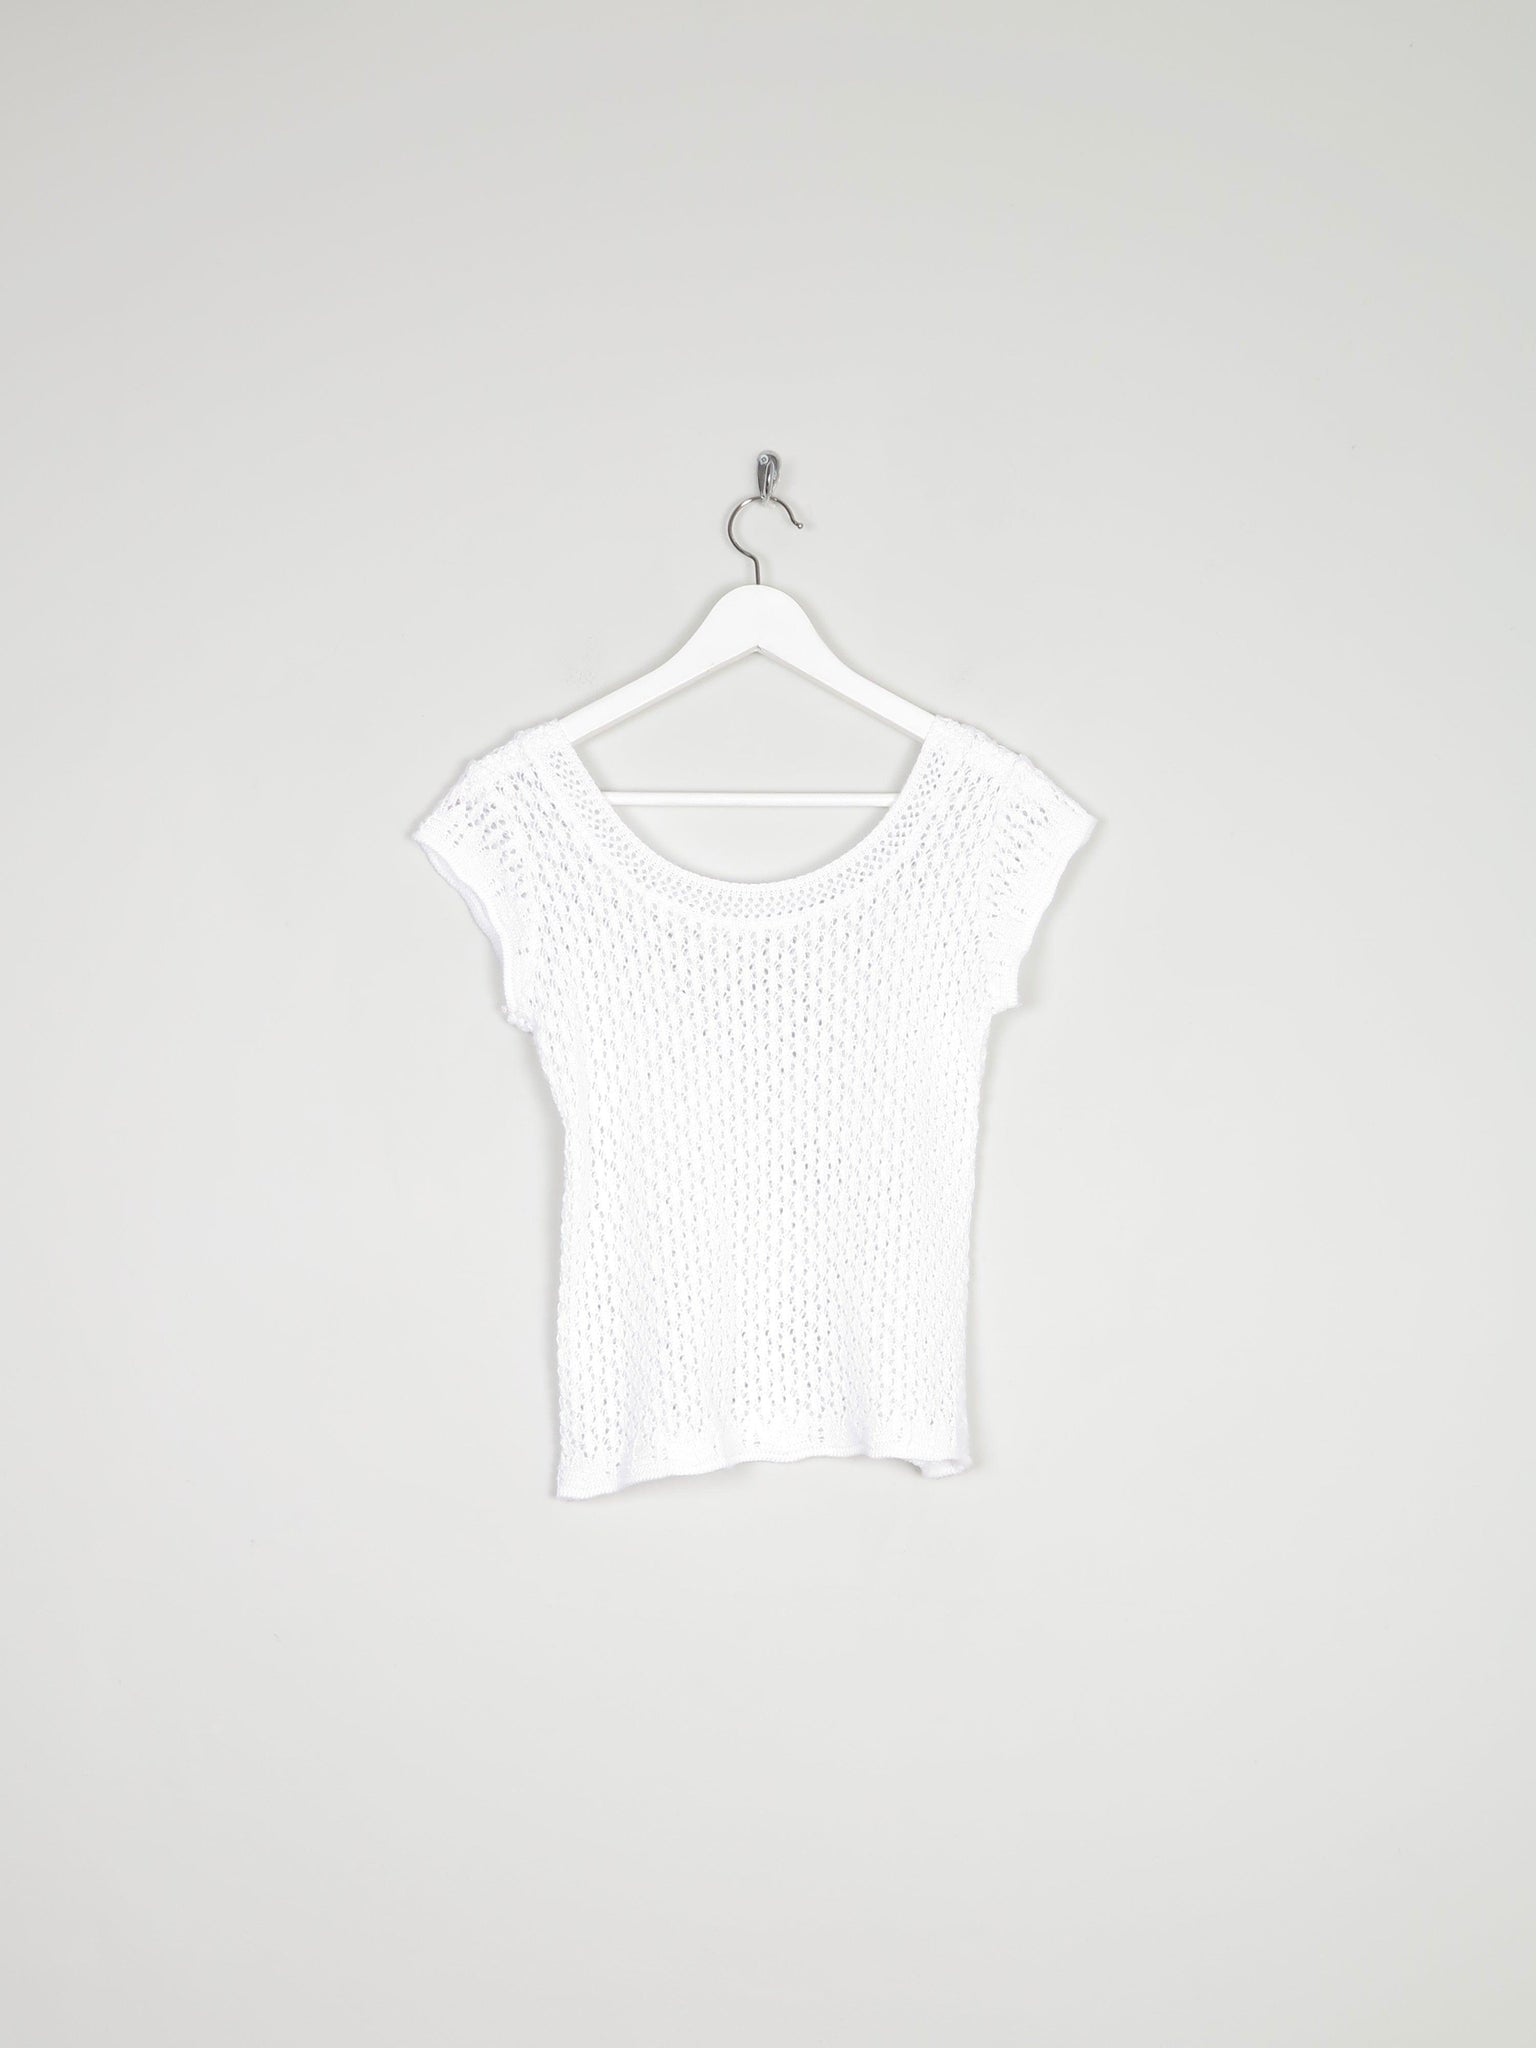 Women’s White Crochet 1970s Fitted Top S - The Harlequin